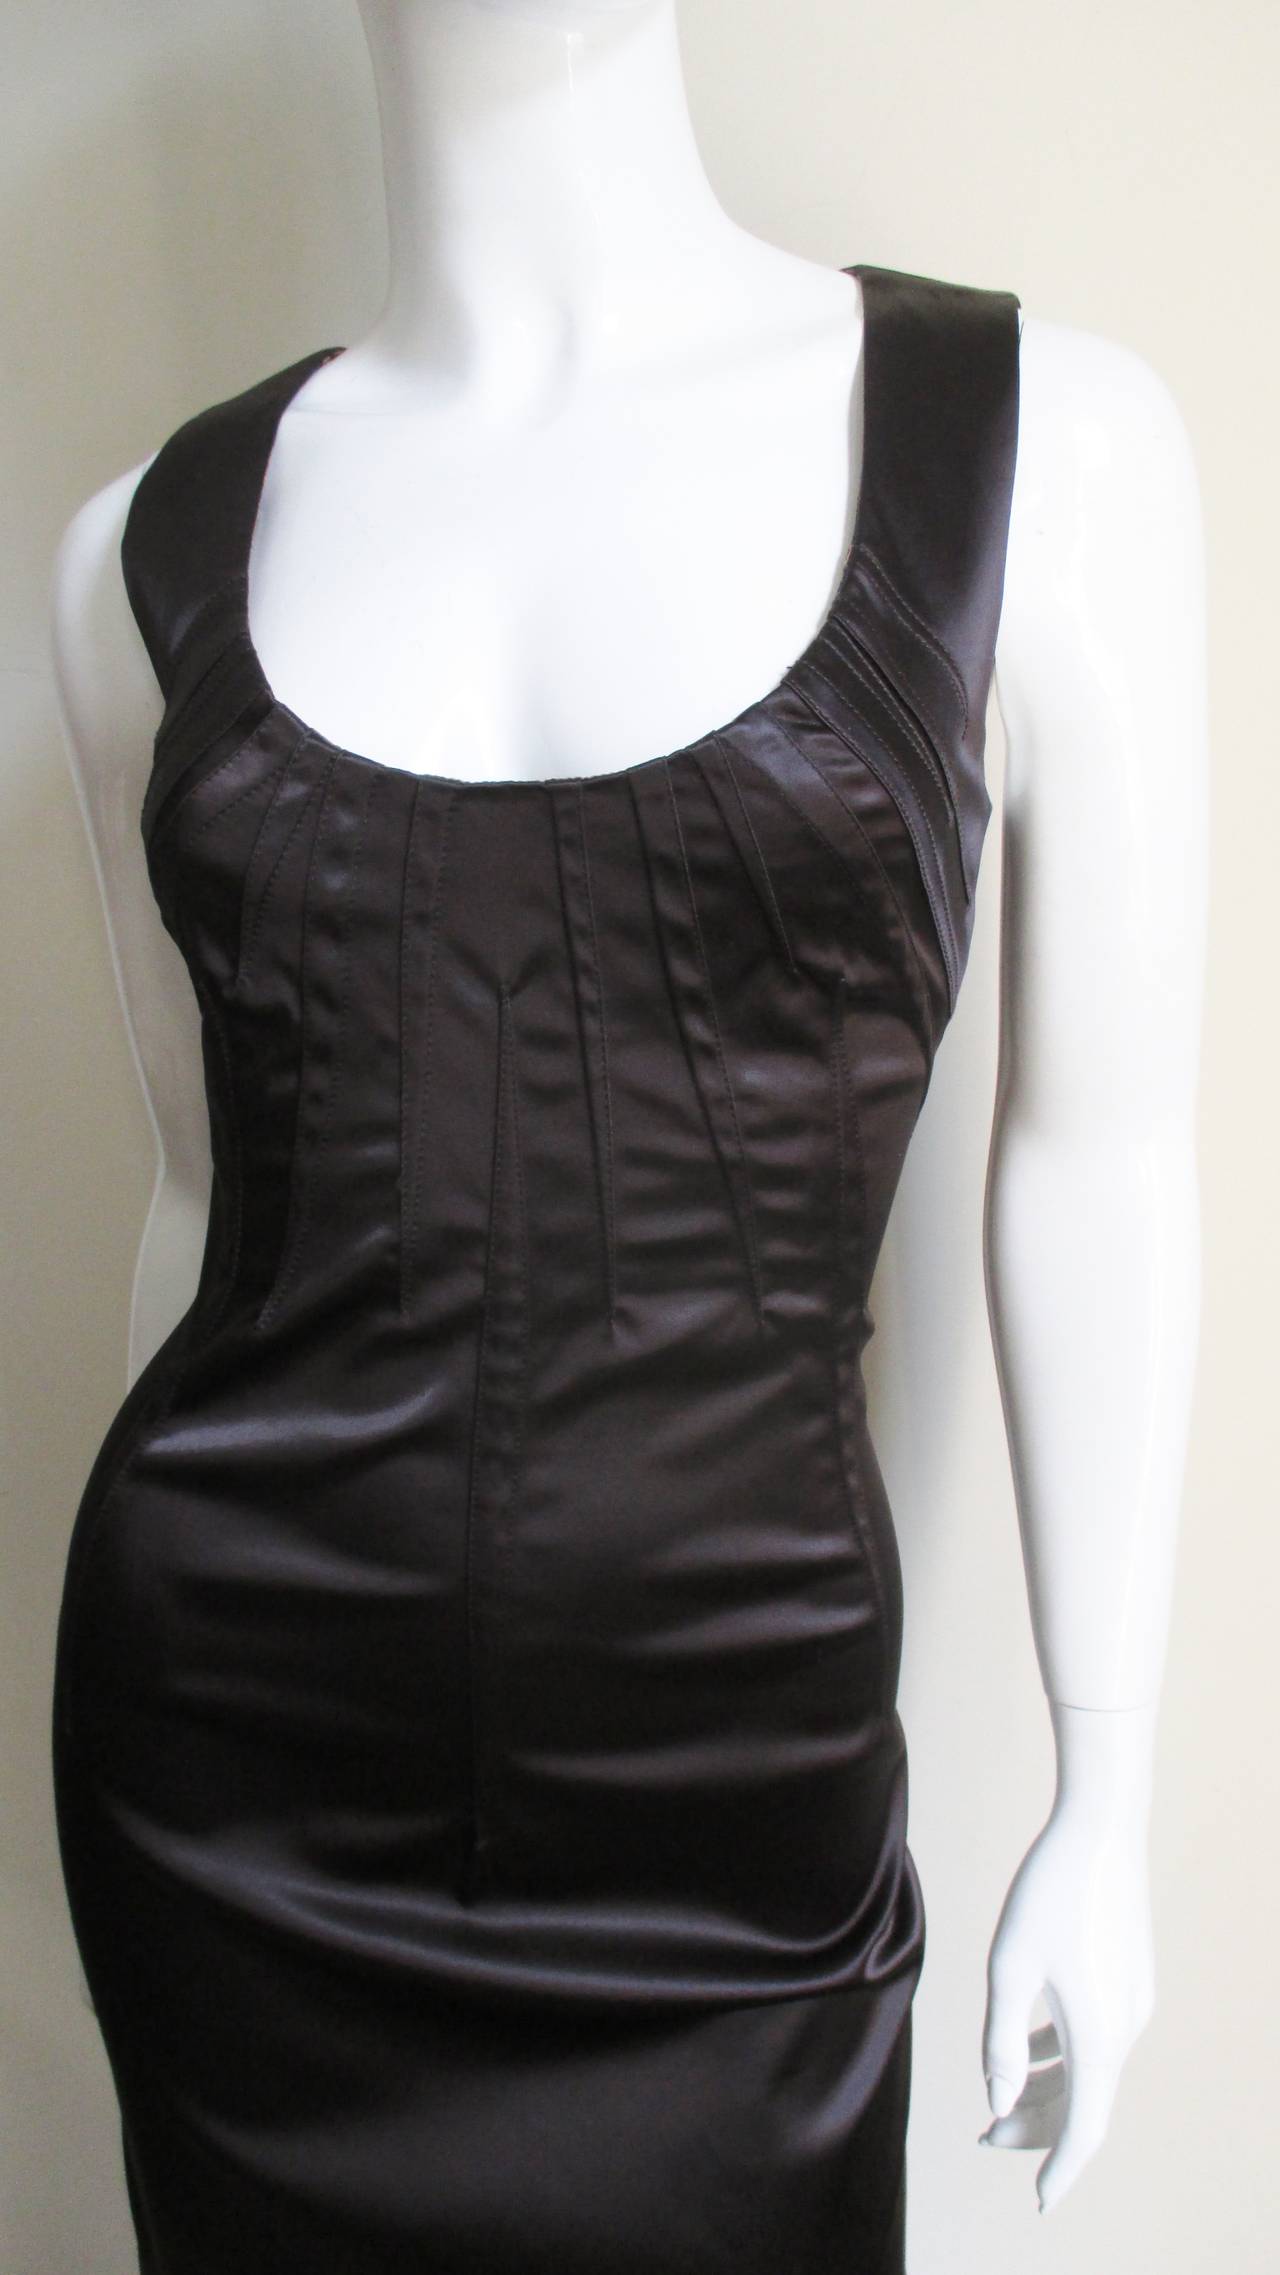  Dolce & Gabbana Dart Detail Bodycon Dress In Good Condition In Water Mill, NY